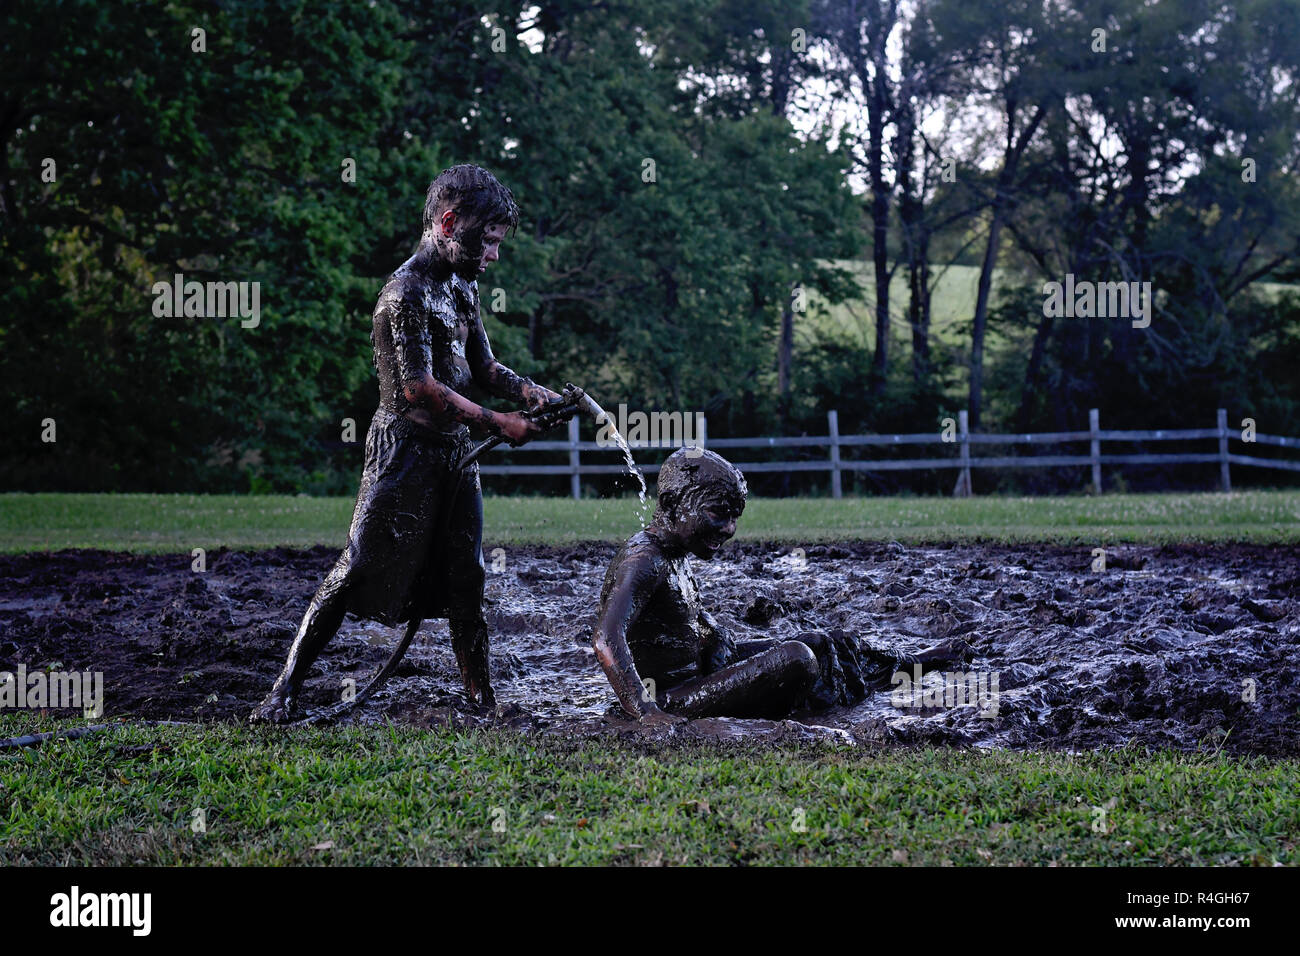 one muddy boy cleaning off another with water from the garden hose after a mud fight Stock Photo